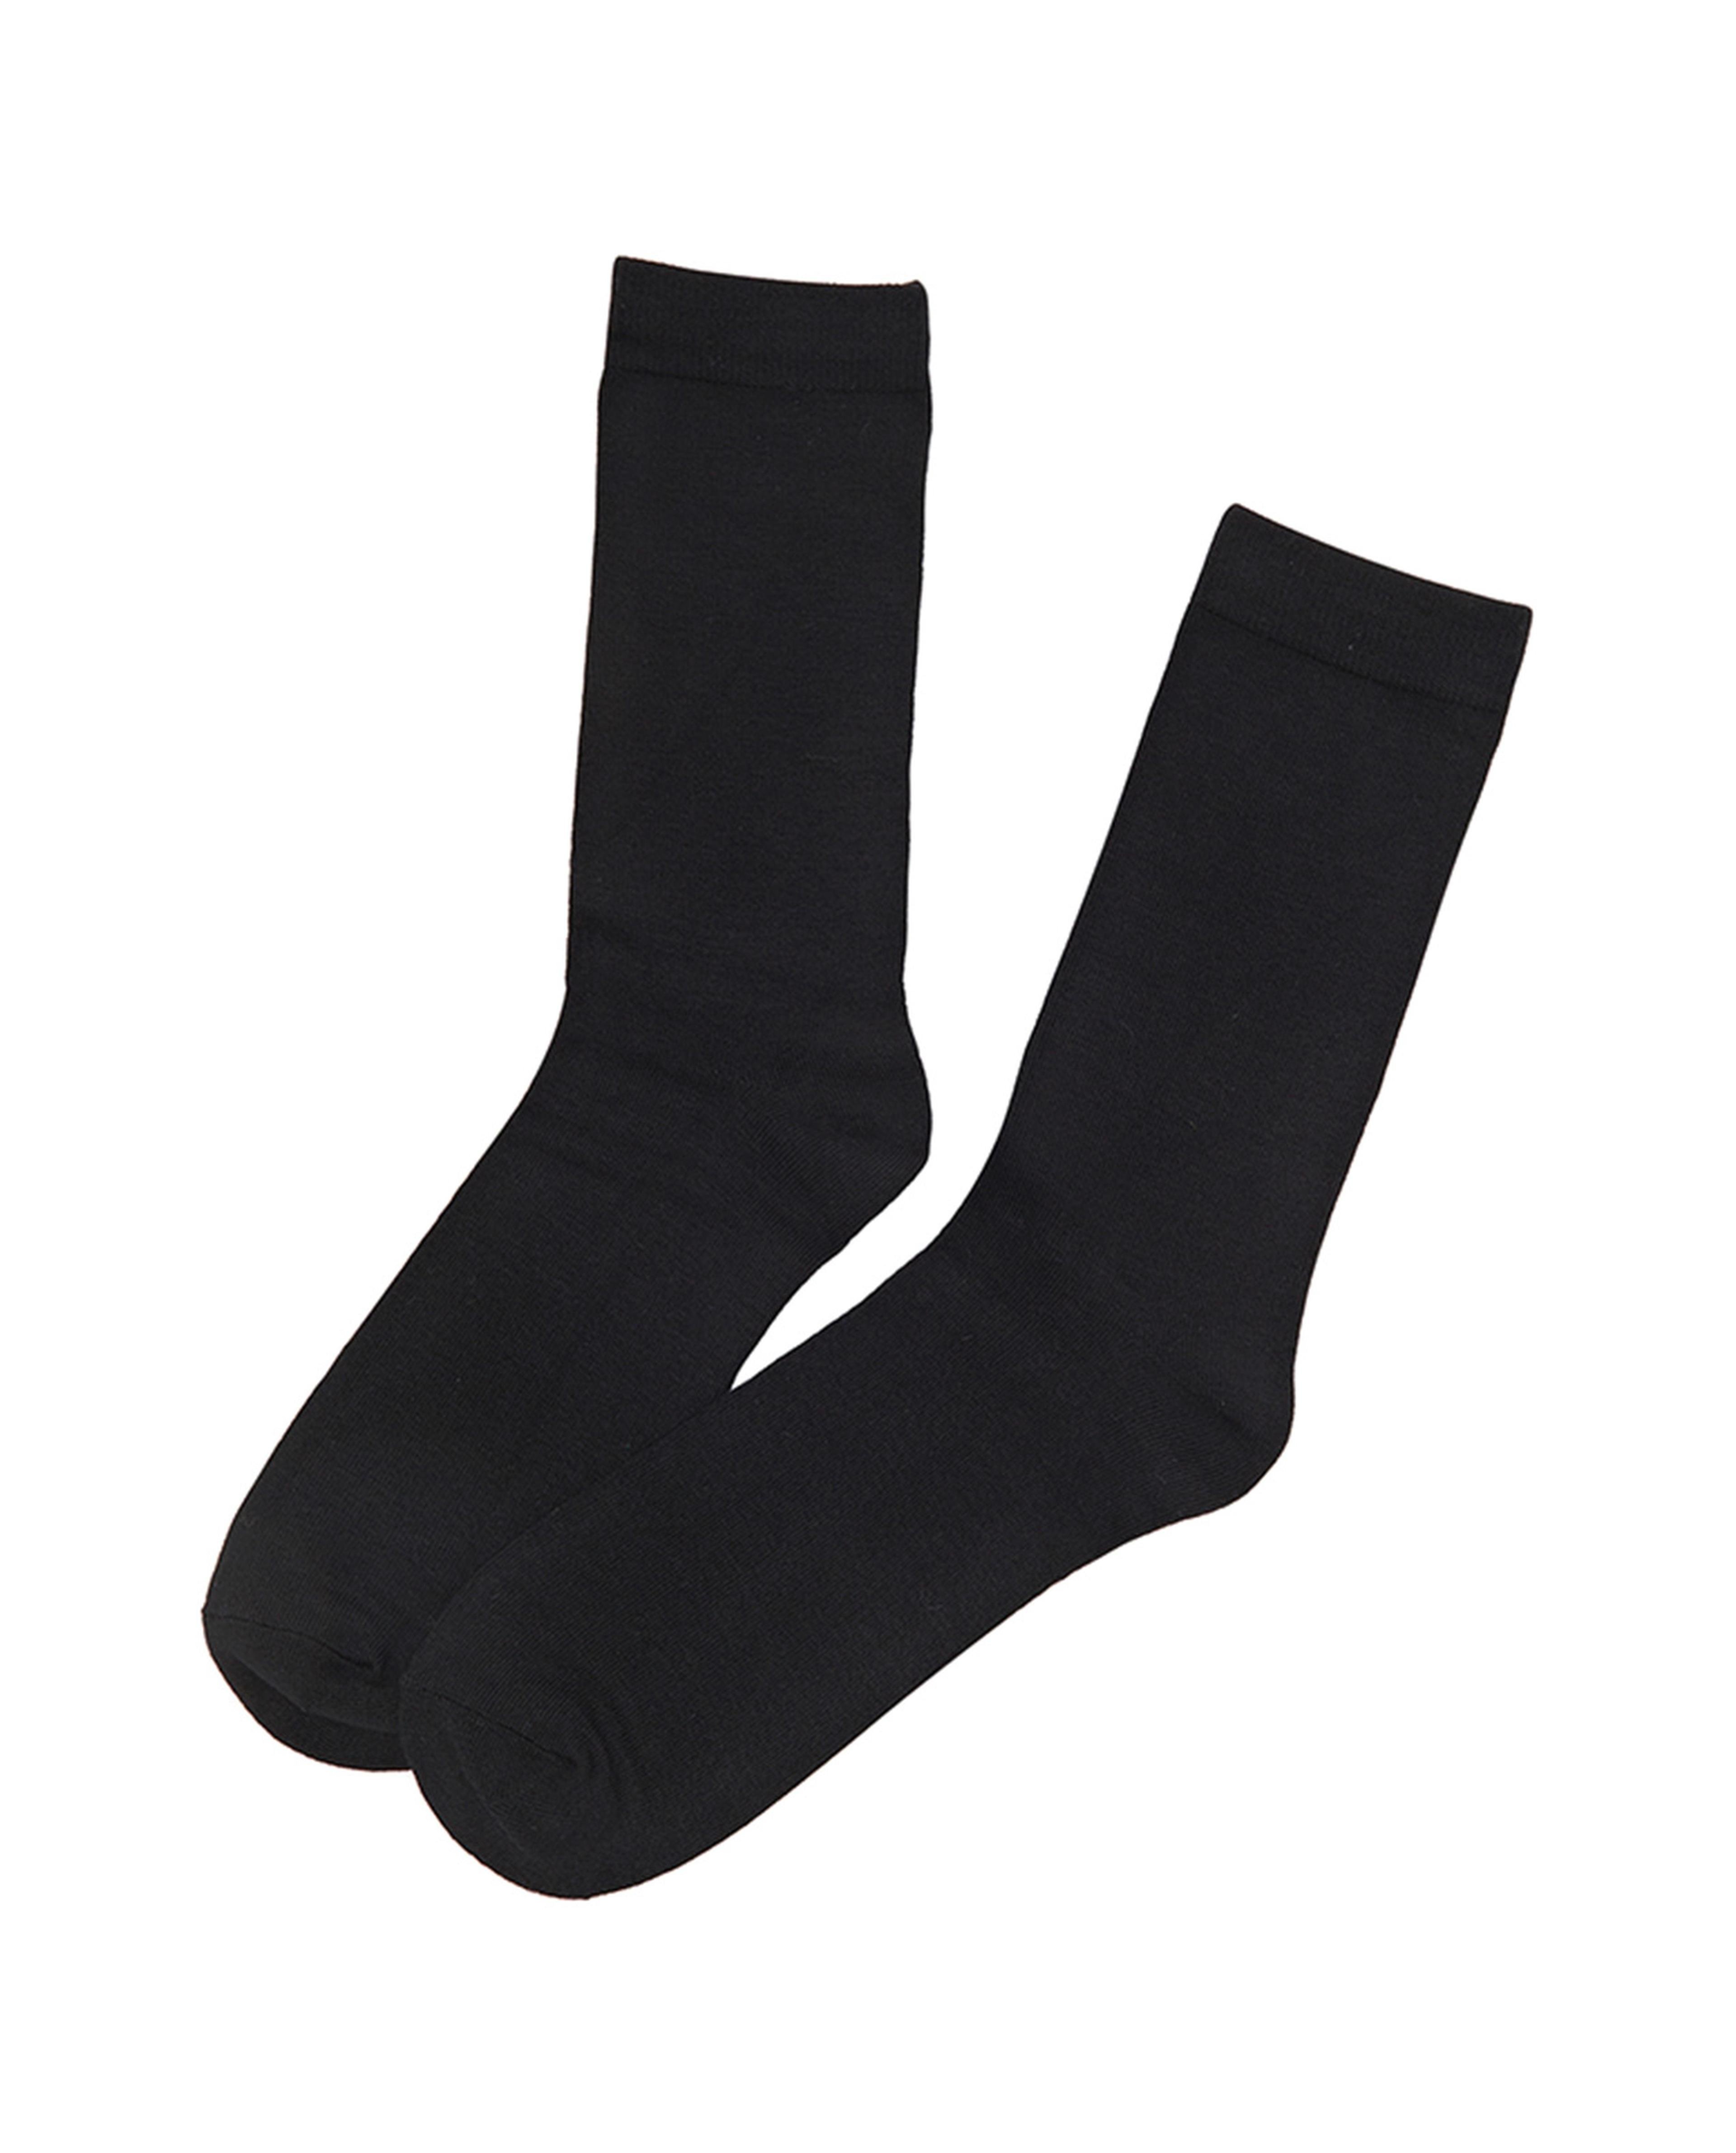 Pack of 5 Solid Crew Socks